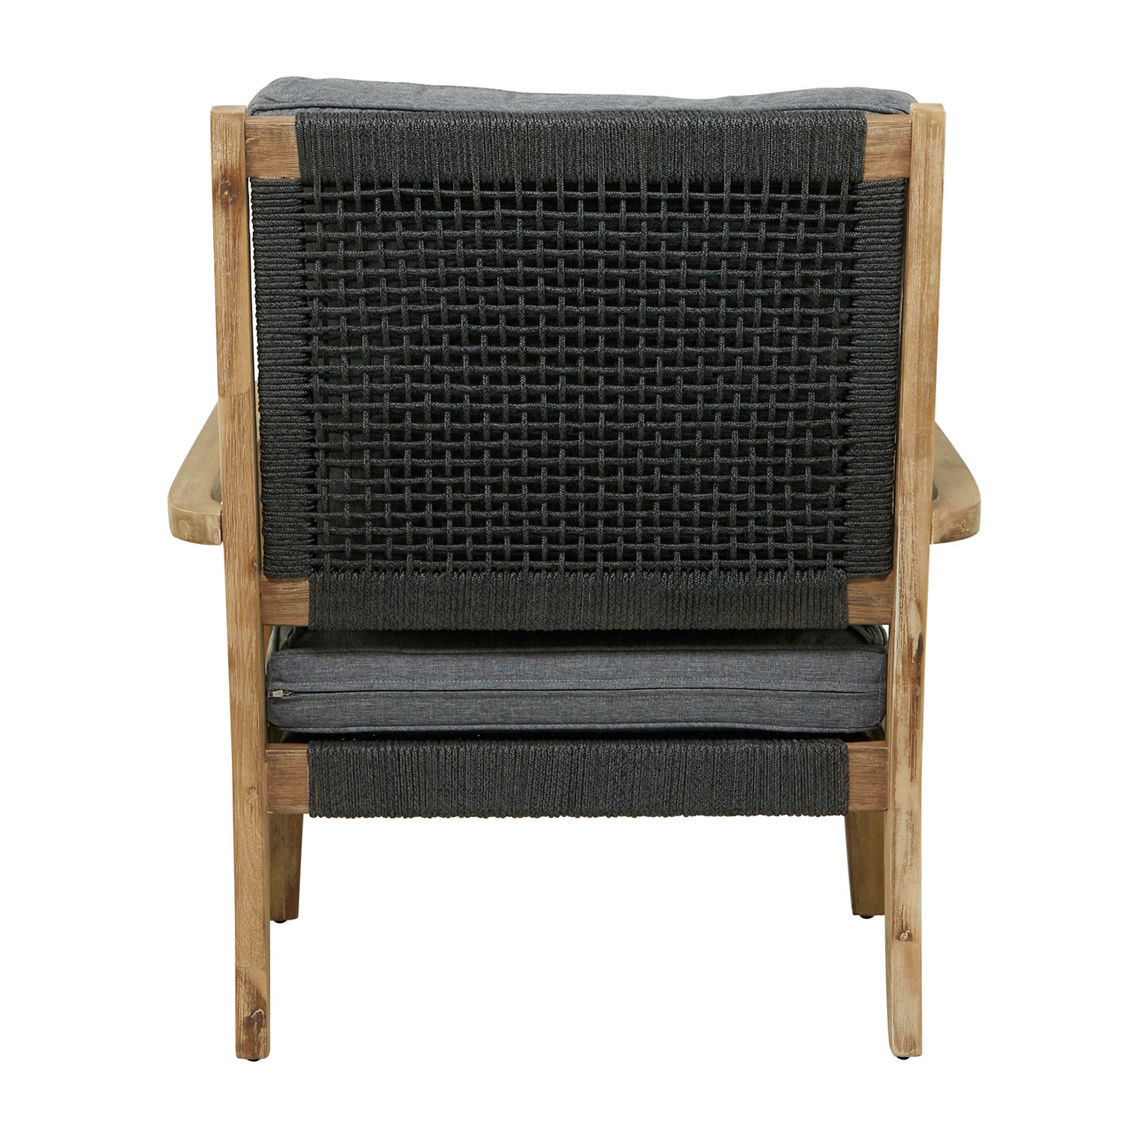 Morgan Hill Home Contemporary Dark Gray Wood Outdoor Chair - Image 3 of 5